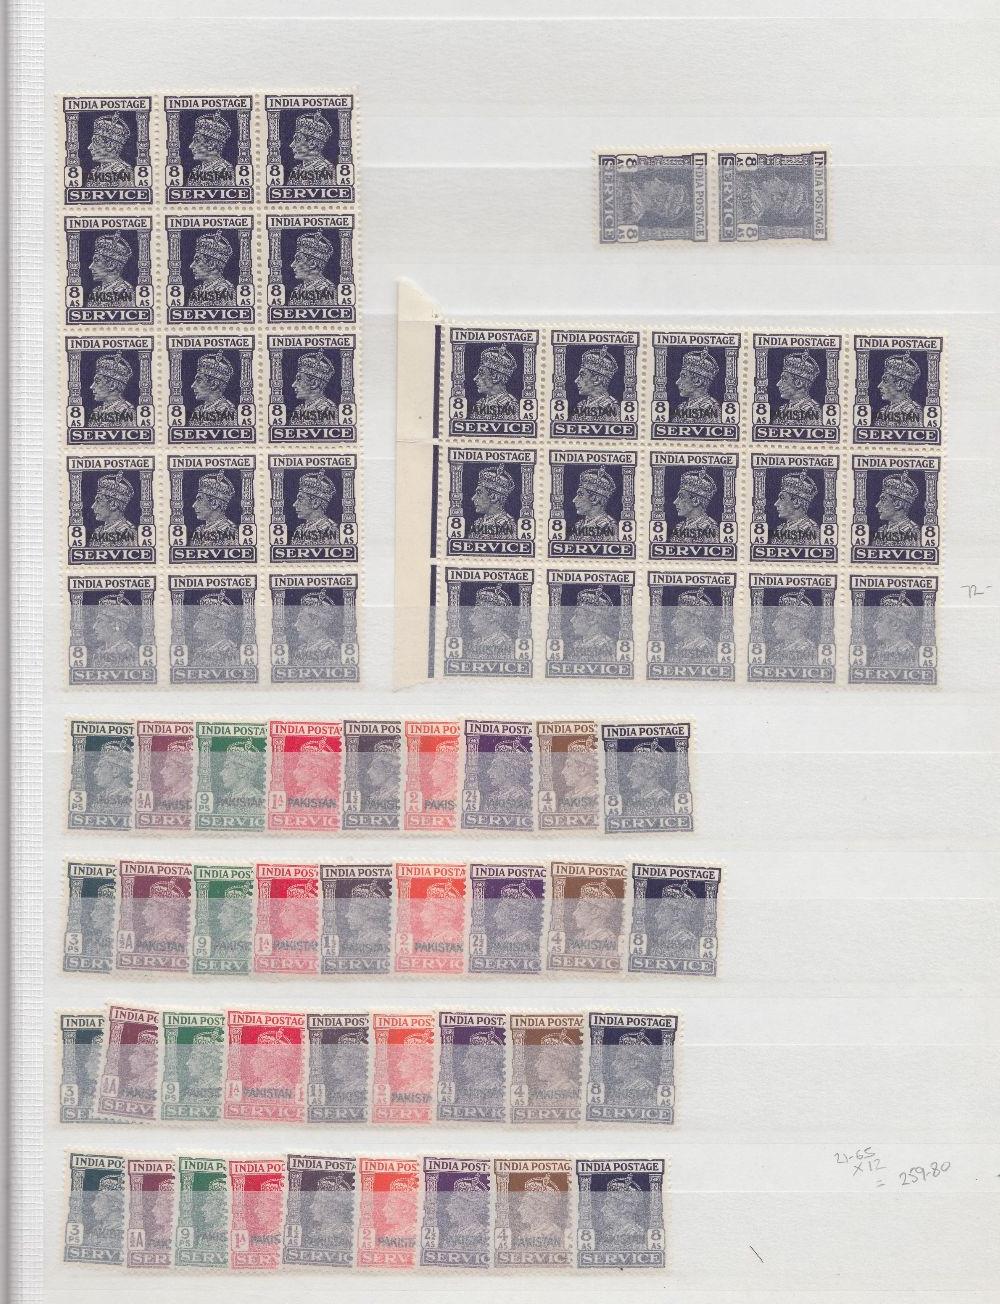 STAMPS PAKISTAN 1947 George VI Official stamps. - Image 3 of 3